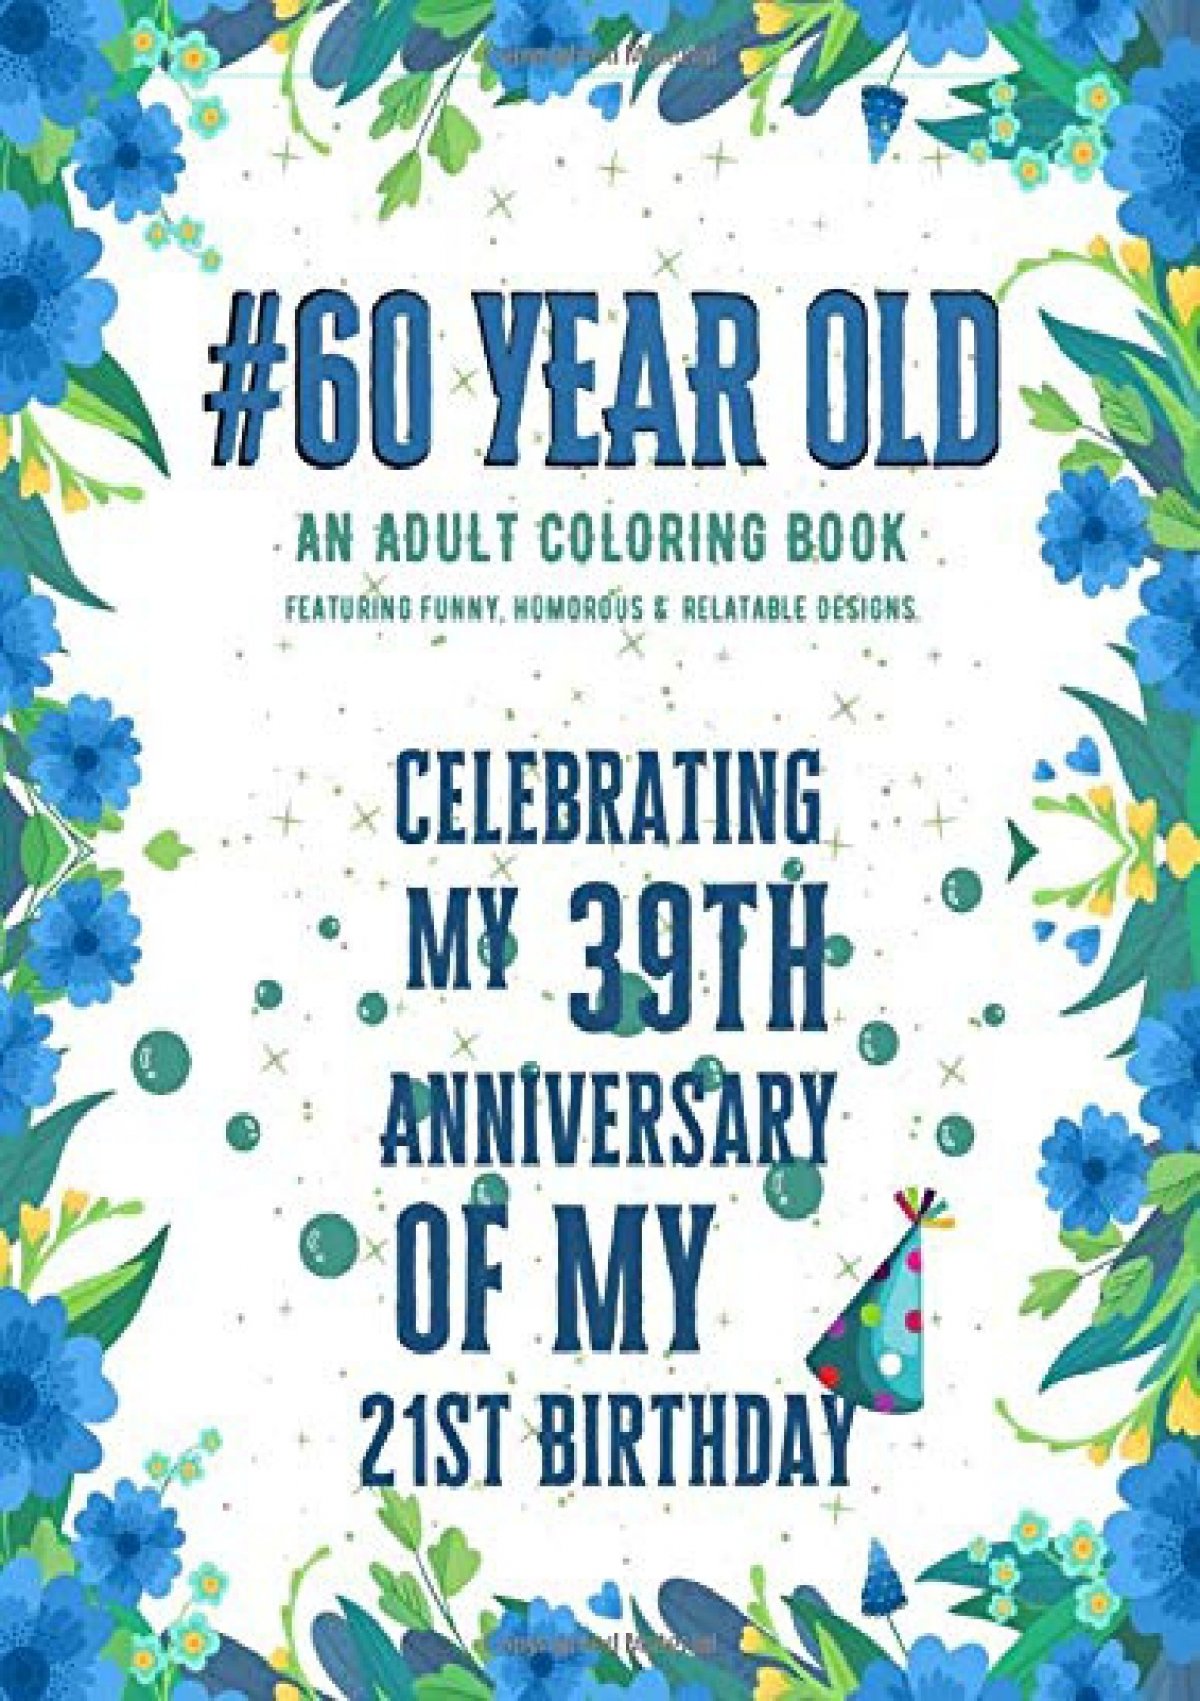 pdf-60-year-old-coloring-book-funny-60th-birthday-gift-adult-coloring-book-with-snarky